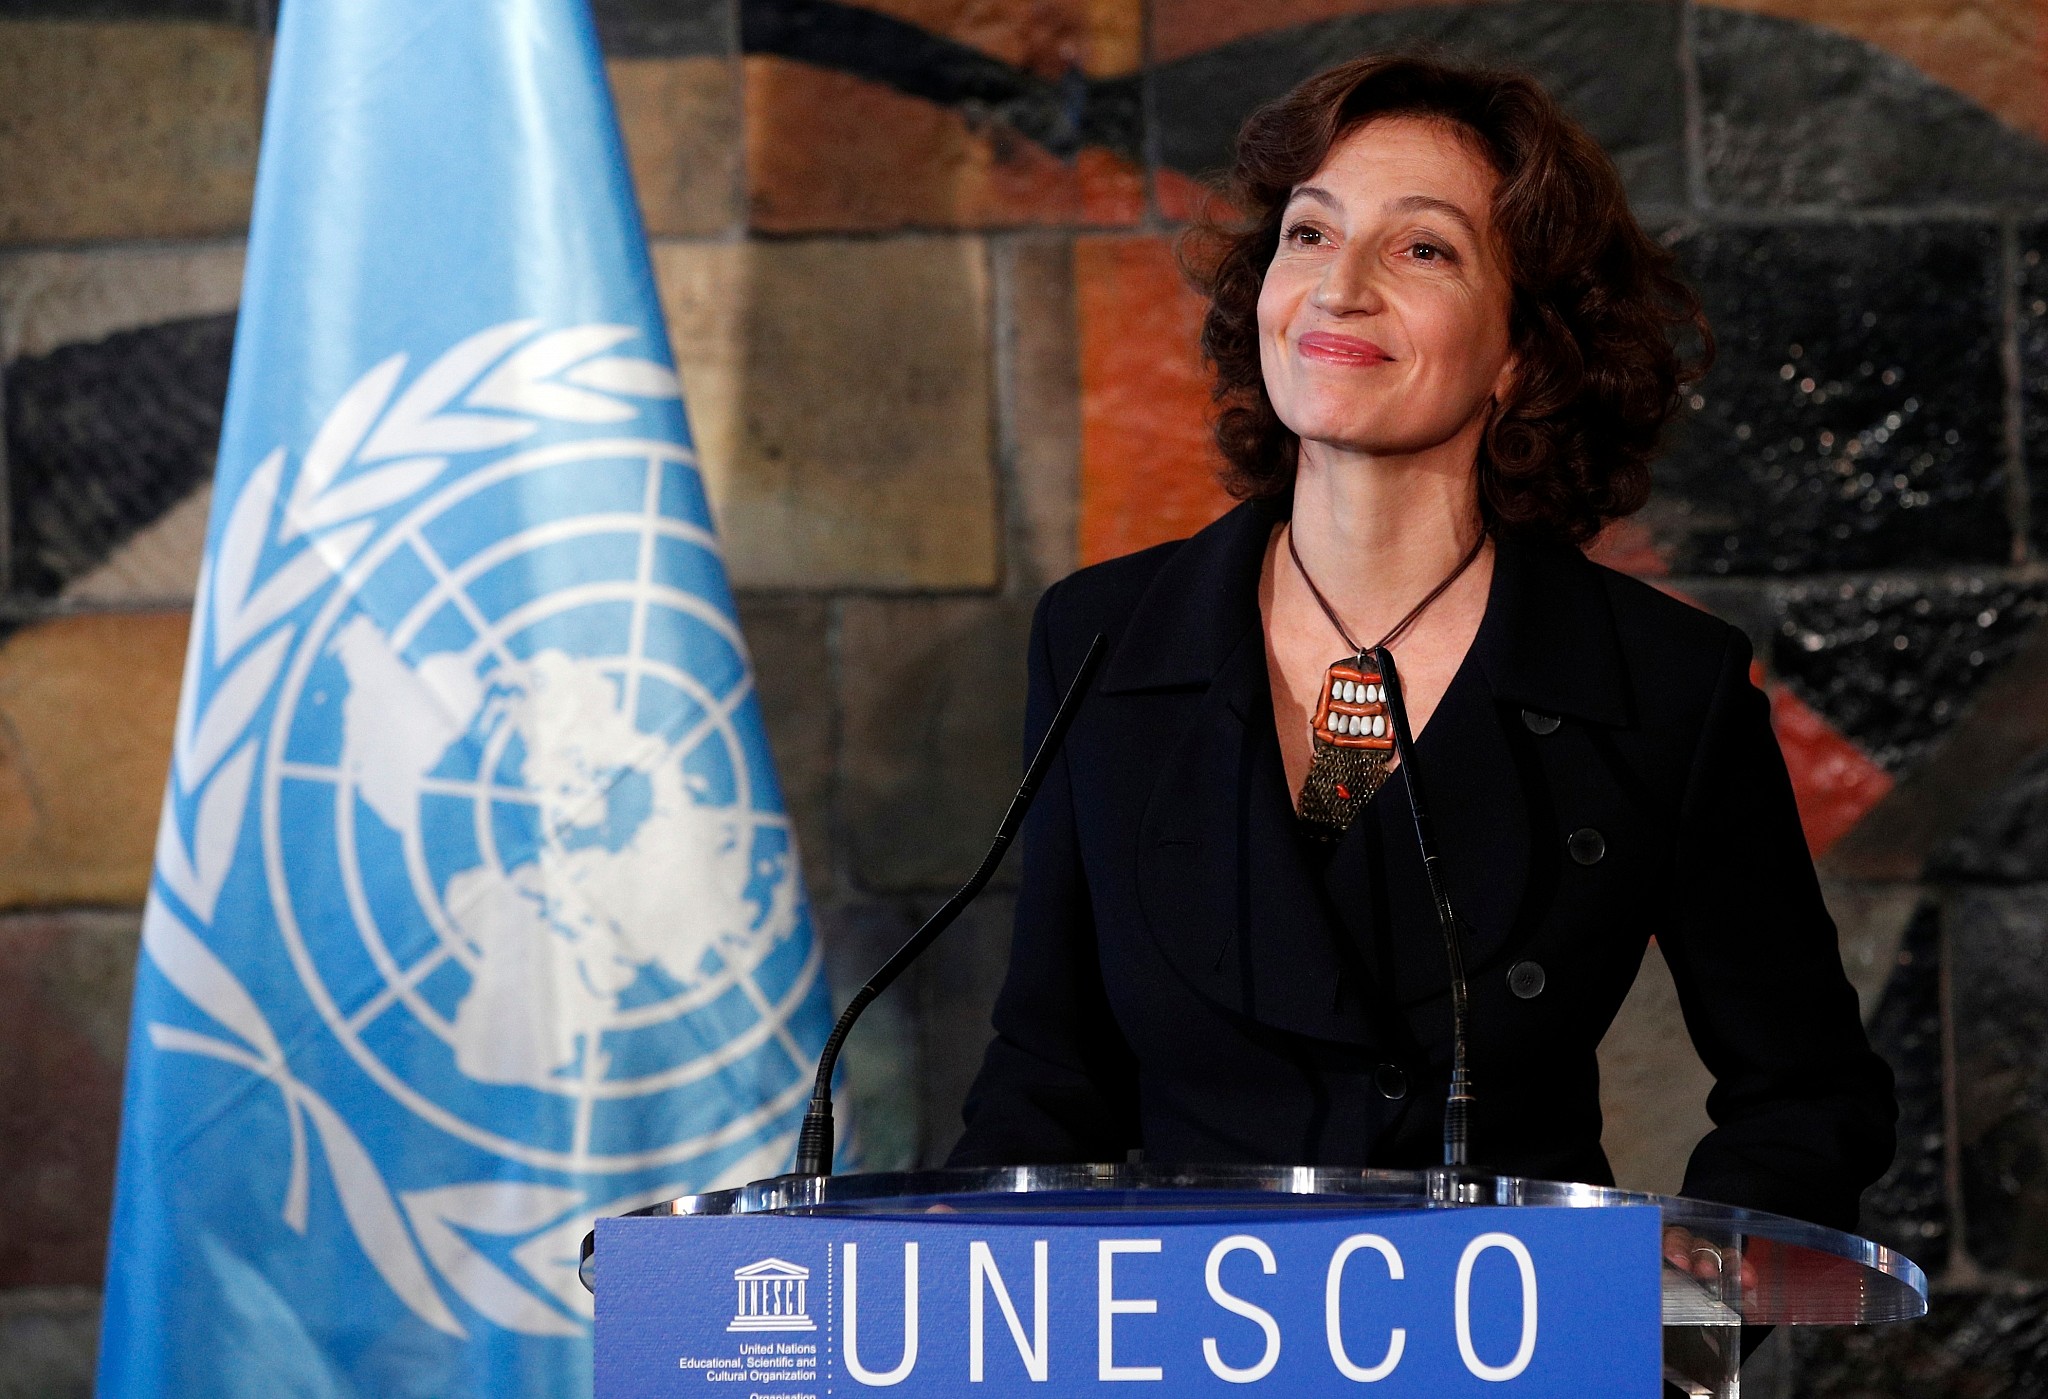 UNESCO: Director General Audrey Azoulay re-elected for 2nd term